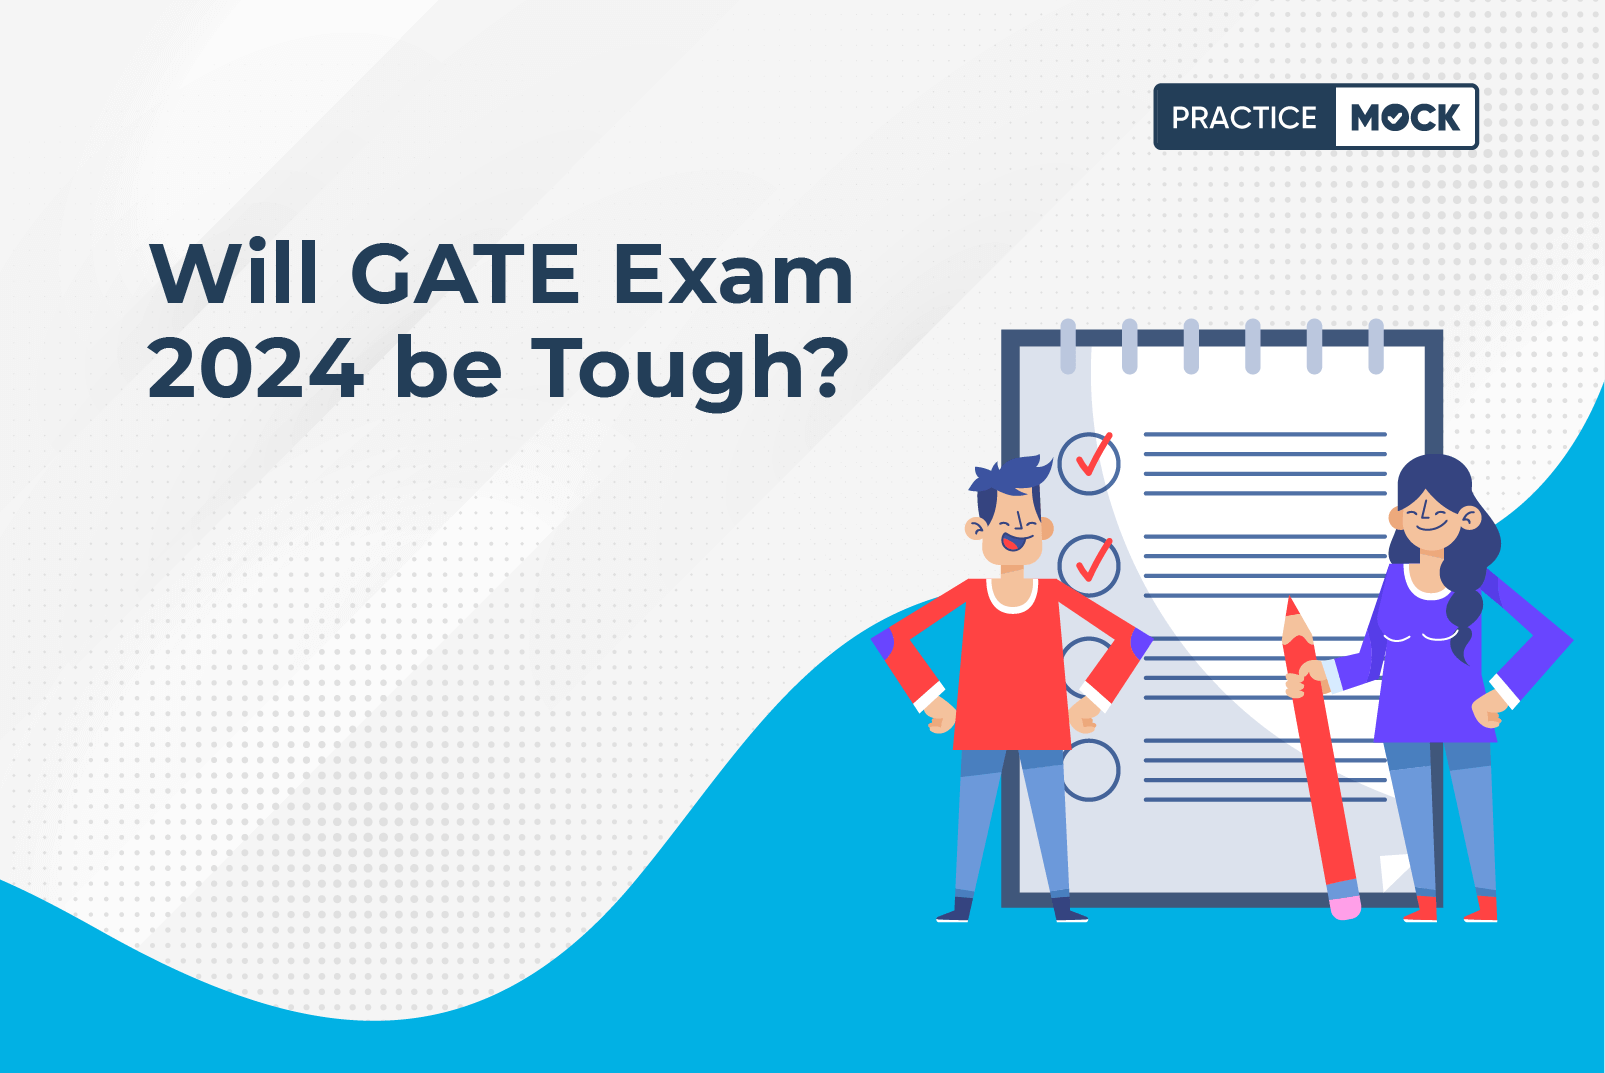 Will GATE exam 2024 be tough